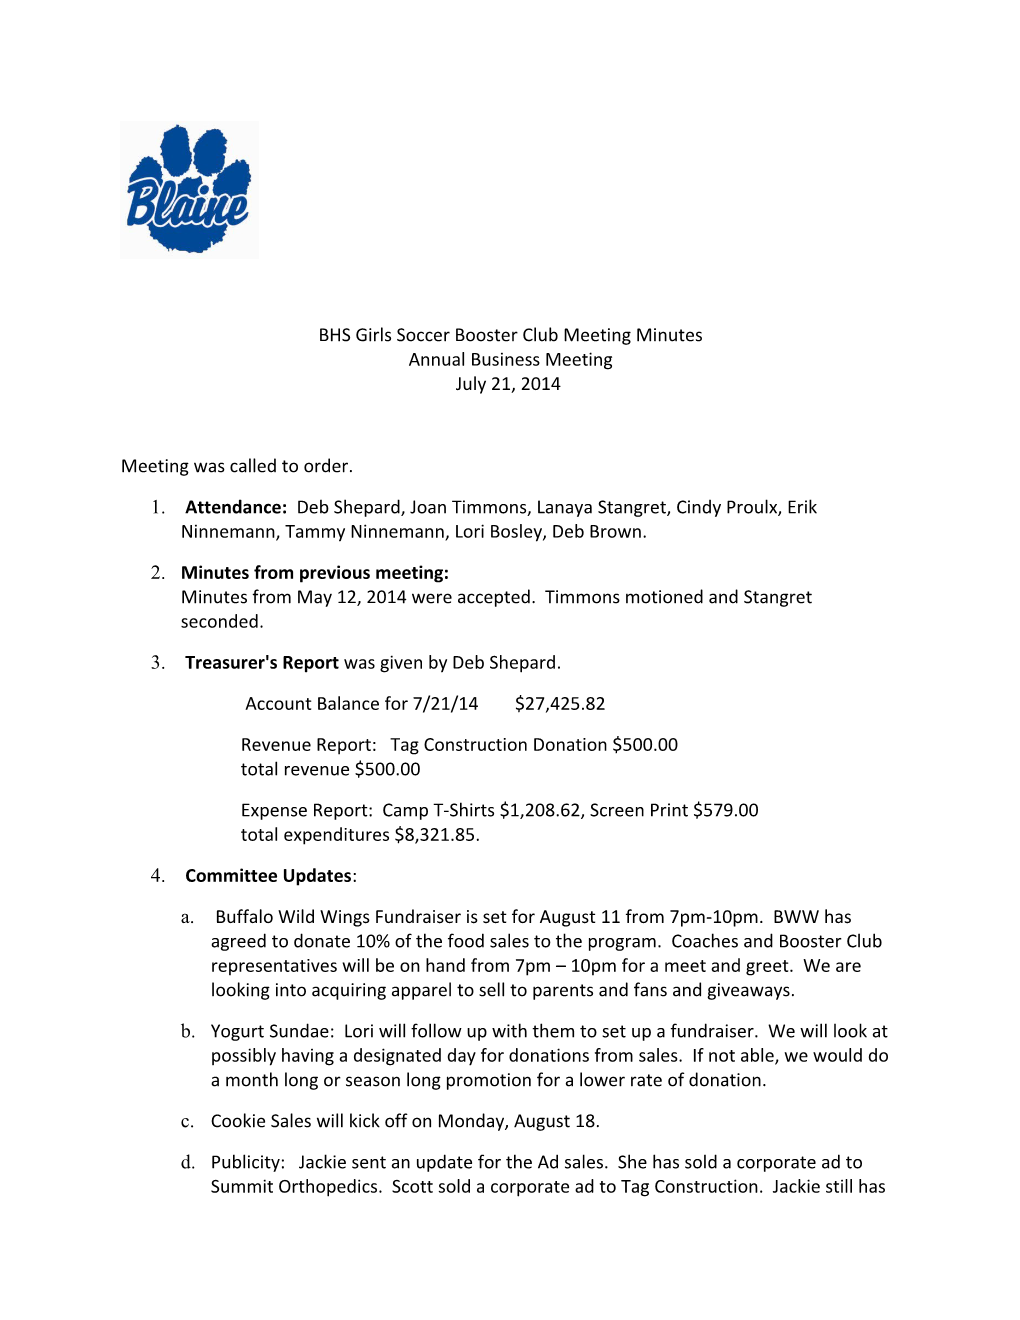 BHS Girls Soccer Booster Club Meeting Minutes Annual Business Meeting July 21, 2014